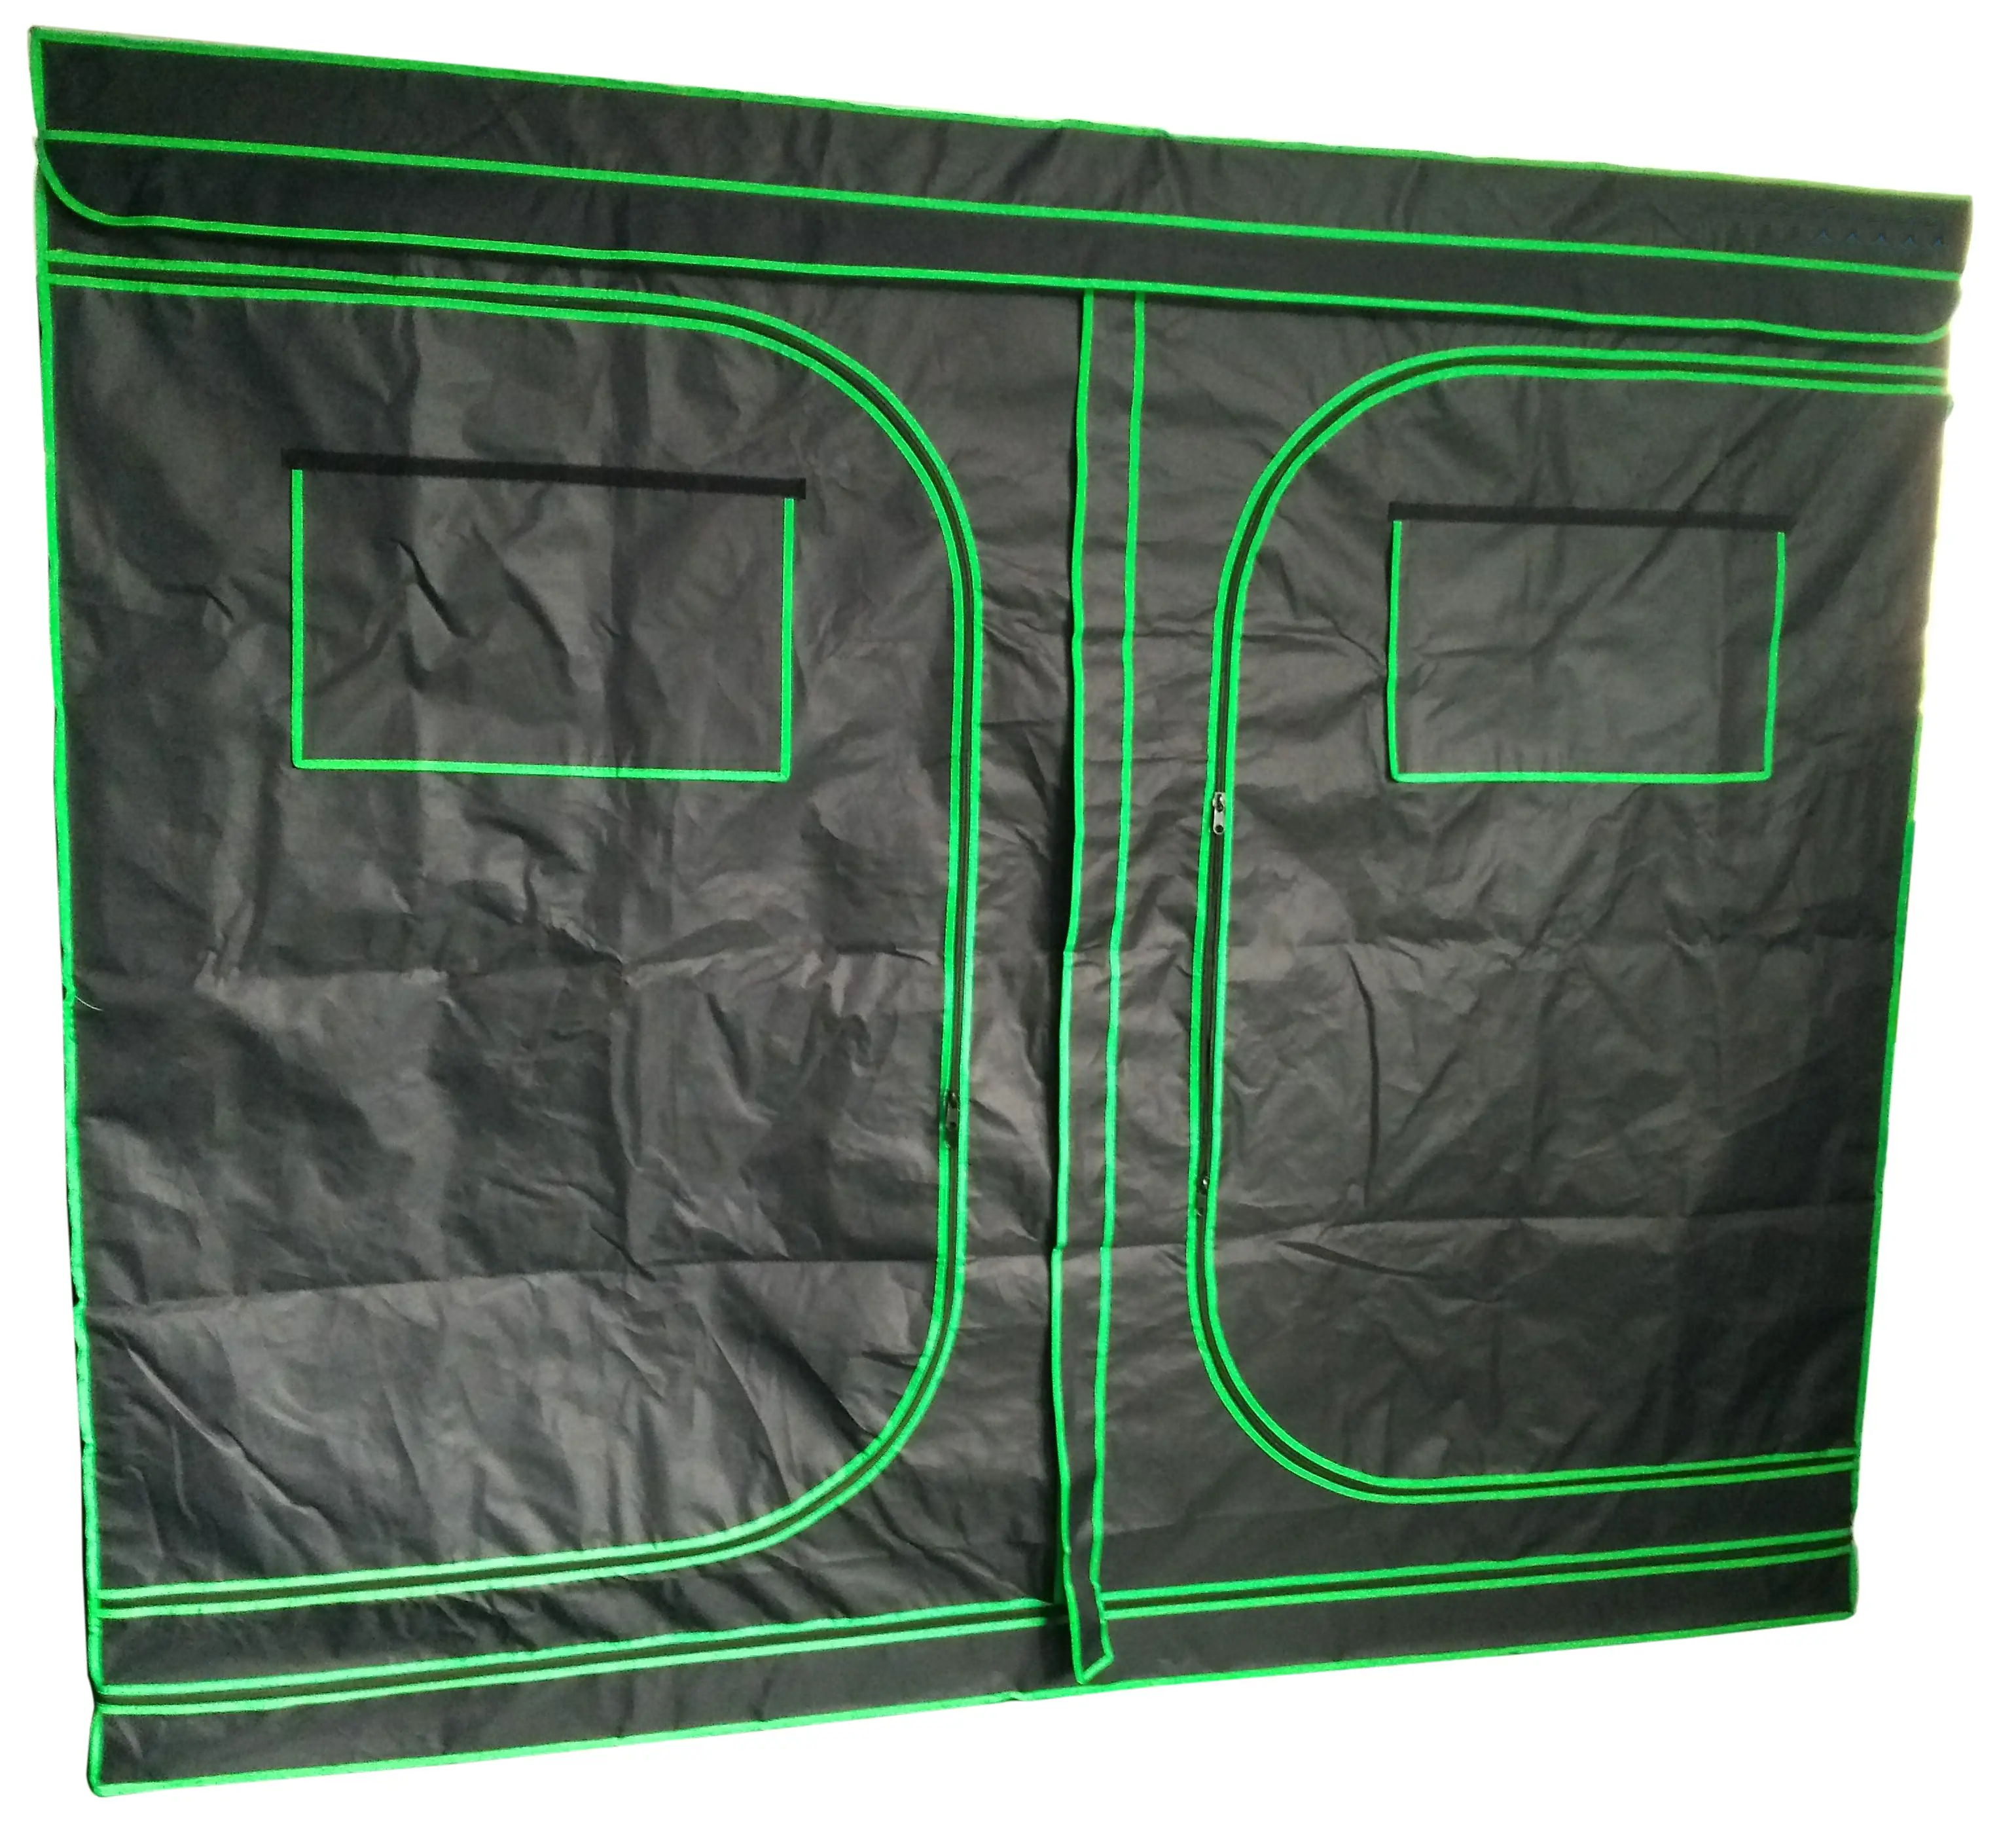 Complete Indoor Box Hydroponic Grow Tent 600D / 1680D Mylar Plant Grow Tent For Sale